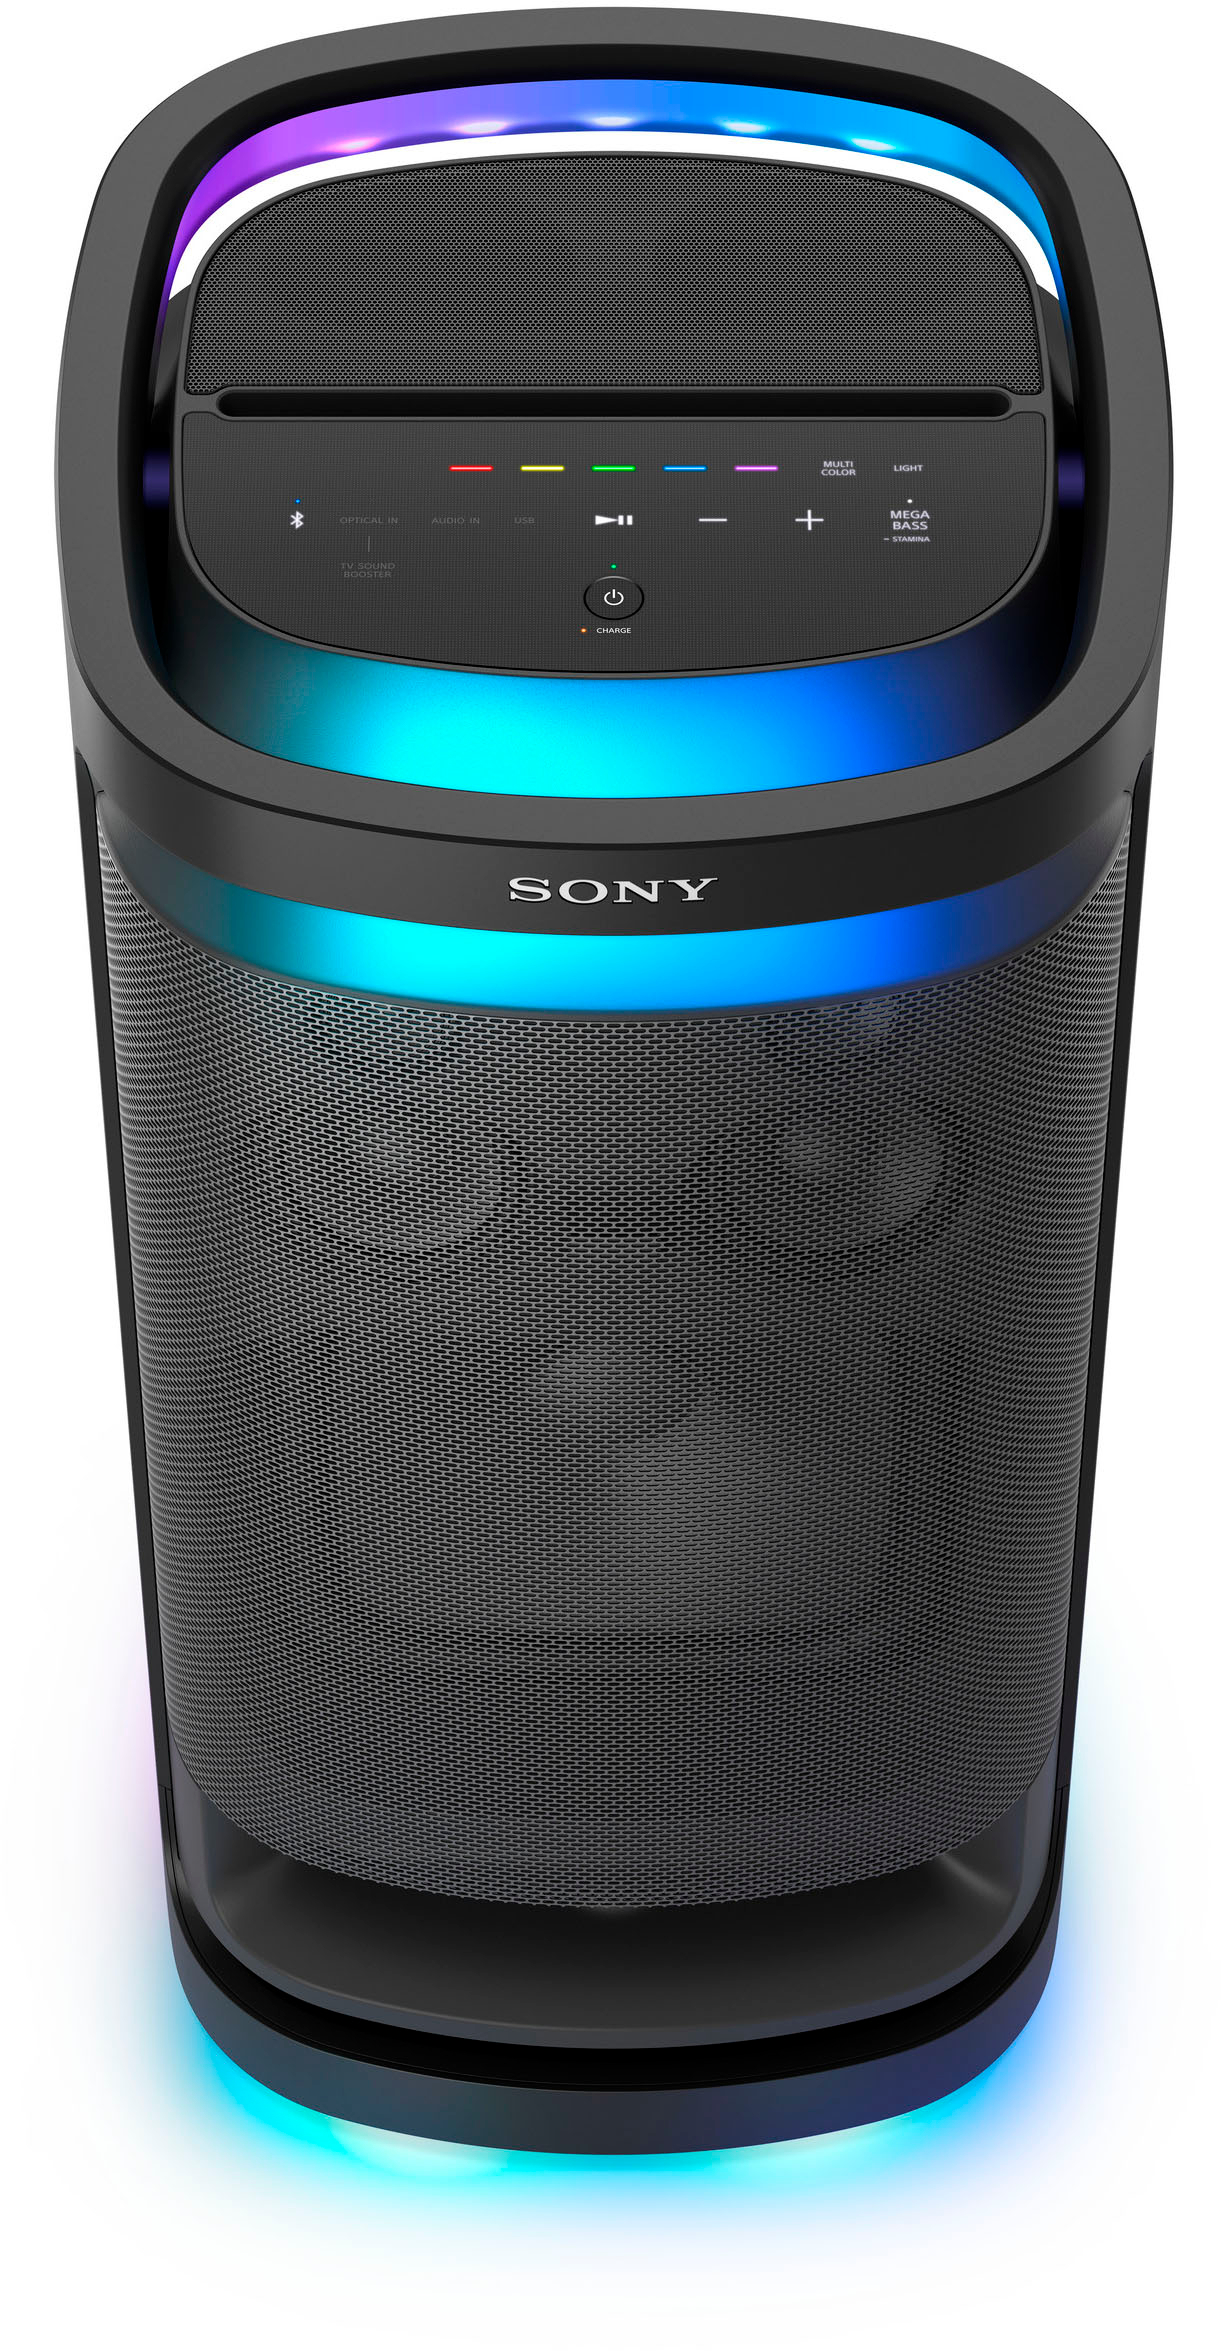 Angle View: Sony - XE300 Portable Waterproof and Dustproof Bluetooth Speaker - Blue